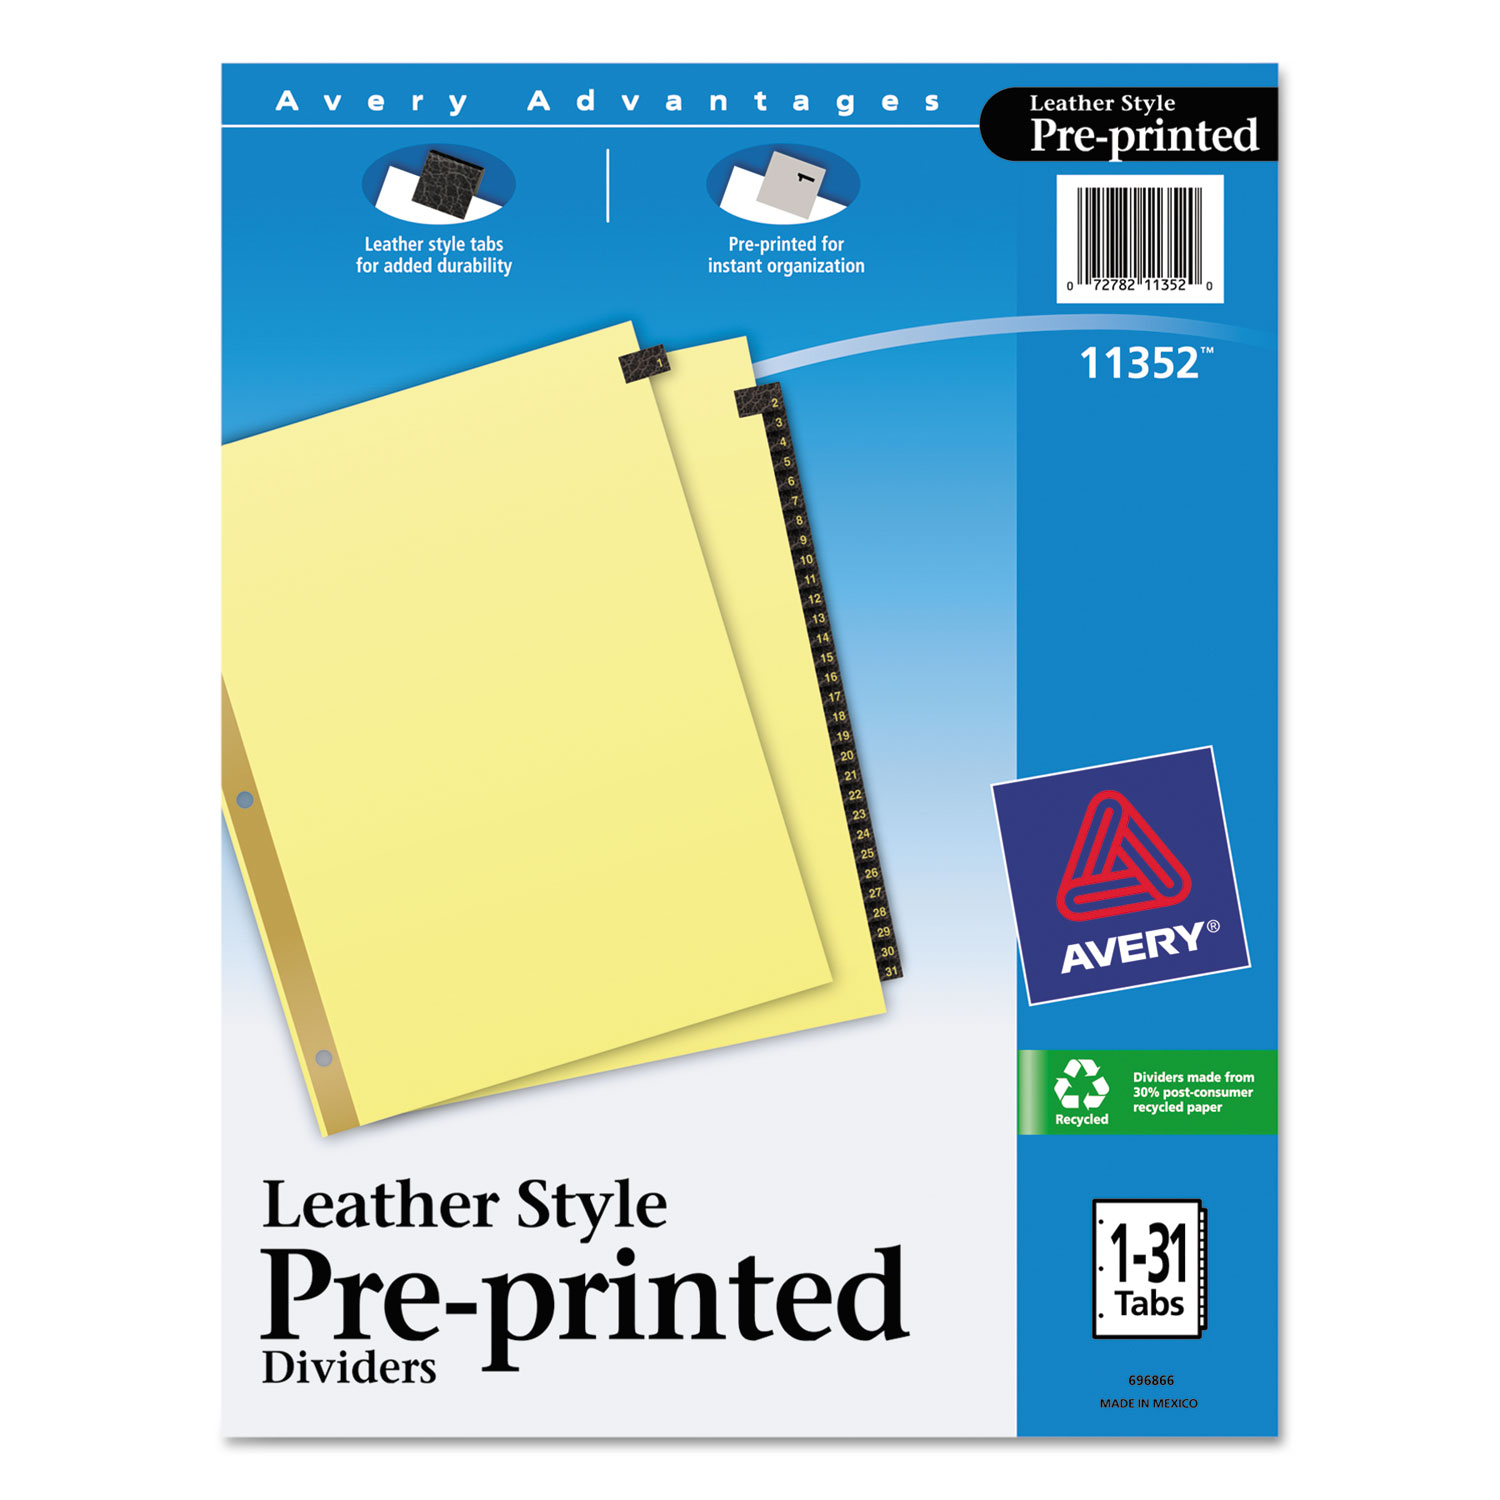  Avery 11352 Preprinted Black Leather Tab Dividers w/Gold Reinforced Edge, 31-Tab, Ltr (AVE11352) 